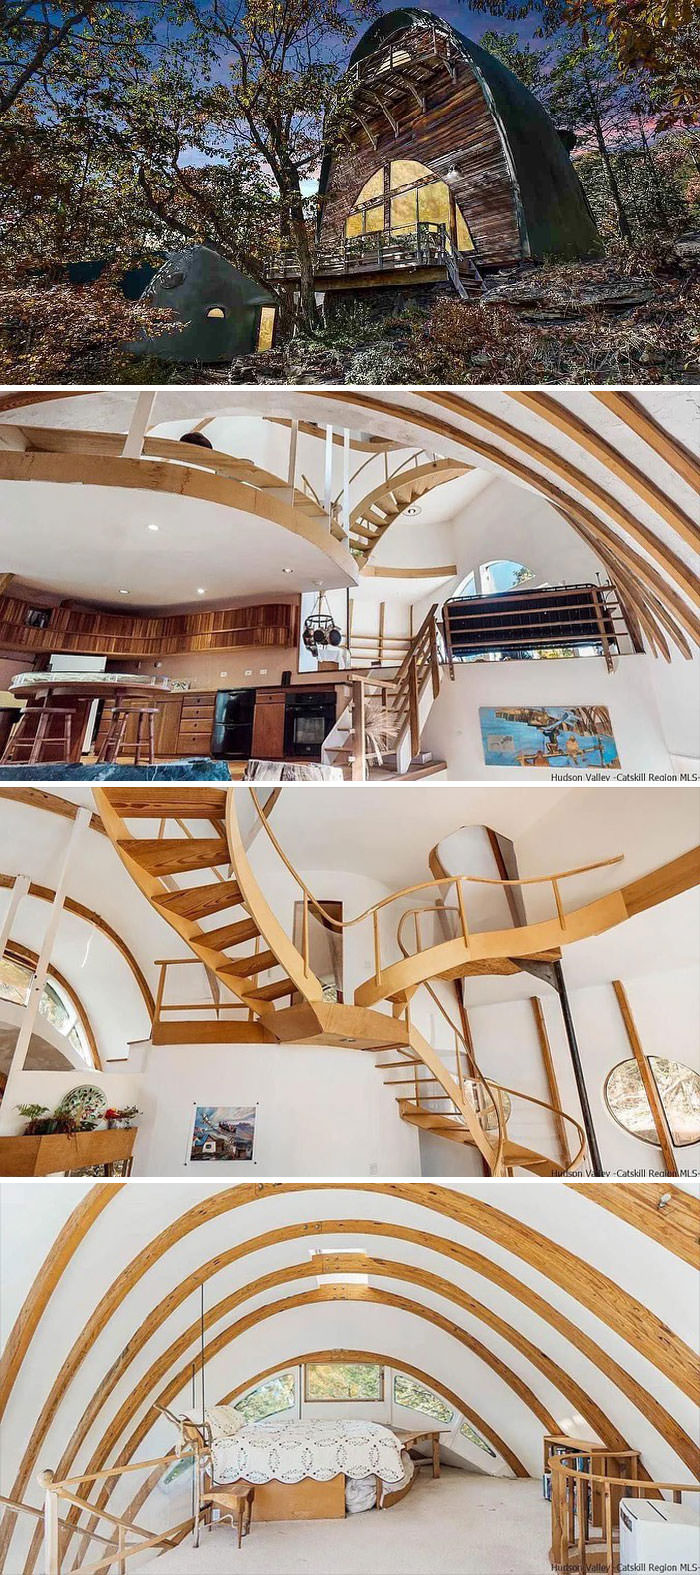 This full house has wacky Escher stairs it's quite something.